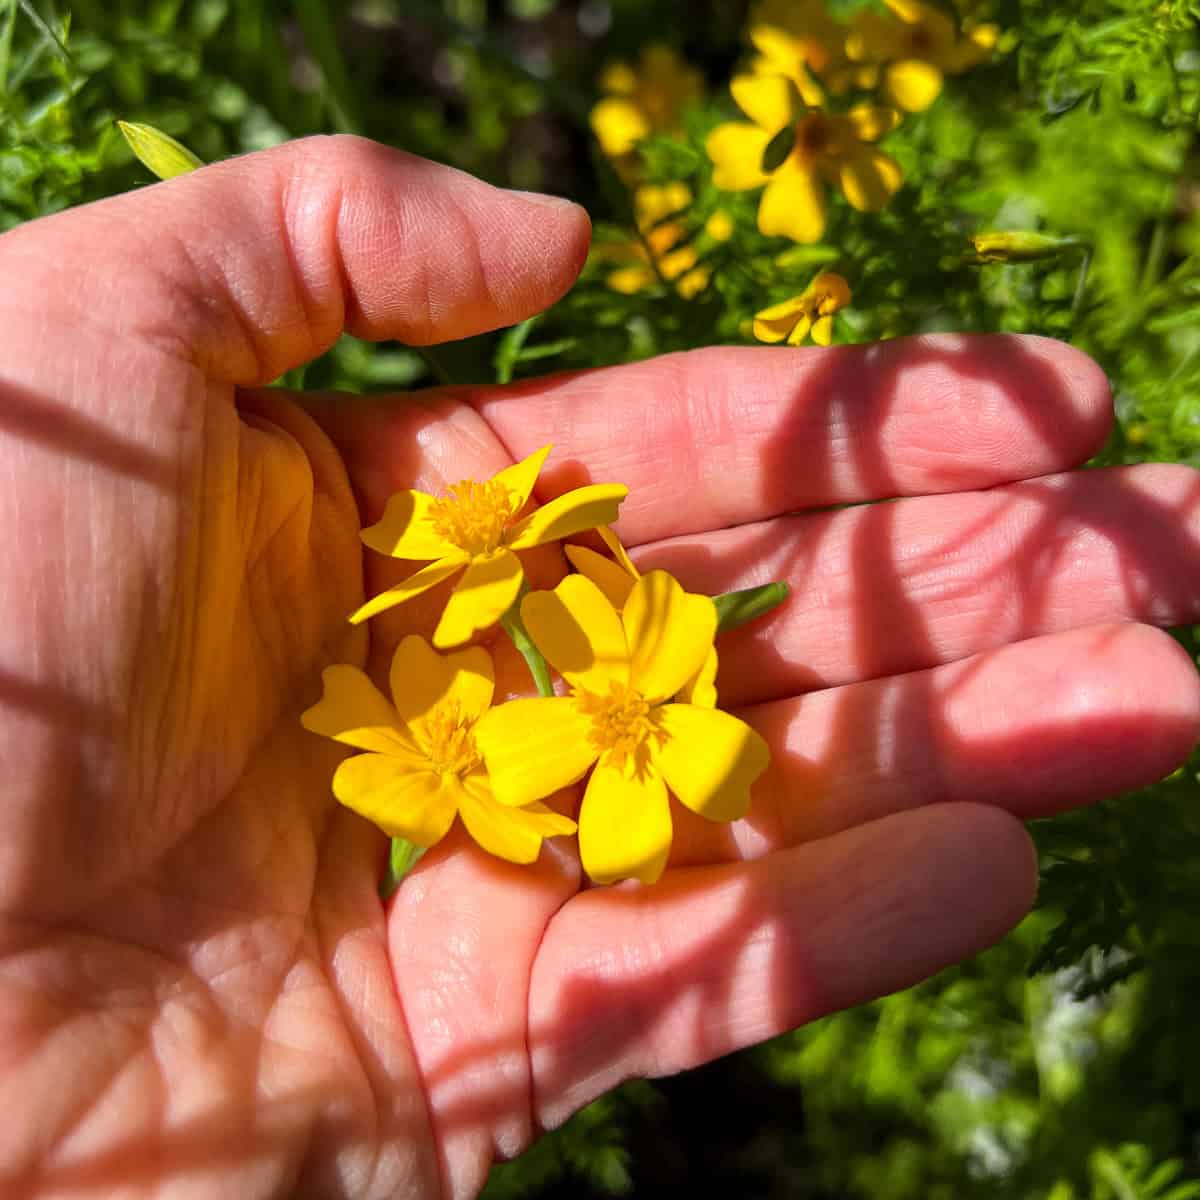 An image of a woman's hand holding edible flowers.